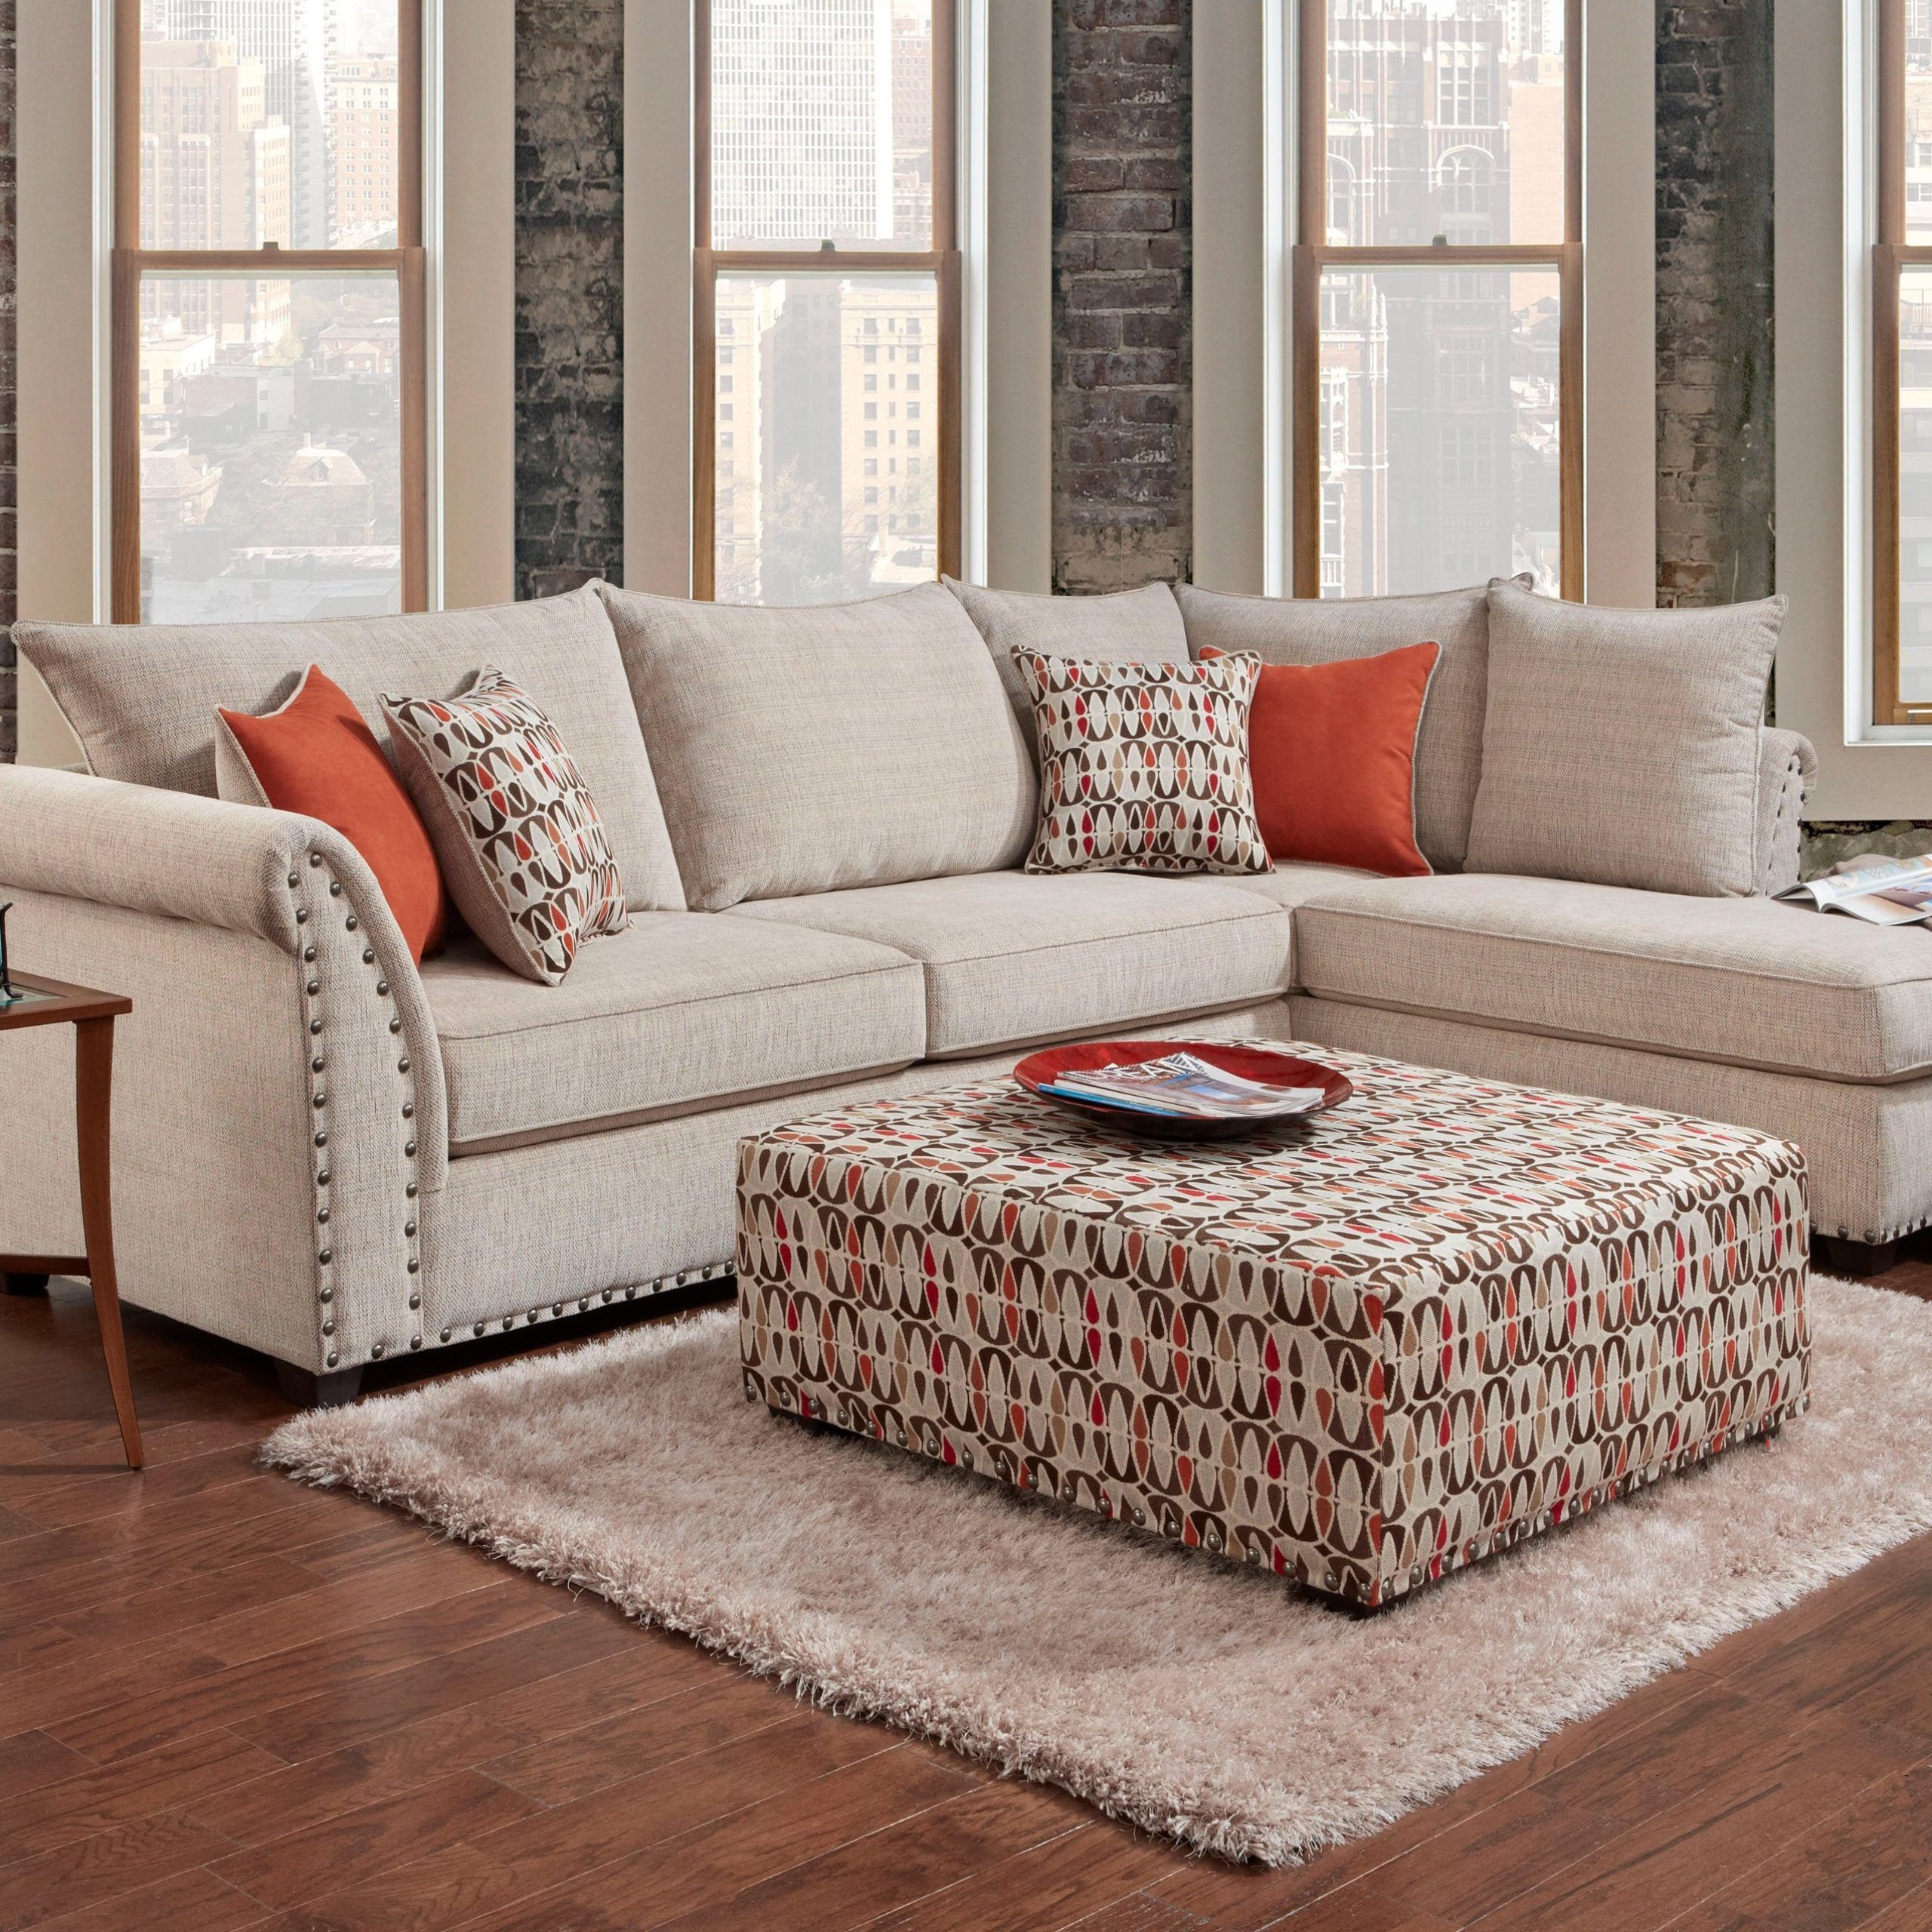 Patton Beige Sectional Sofa Set – Afurniturecompany For Beige L Shaped Sectional Sofas (View 16 of 20)